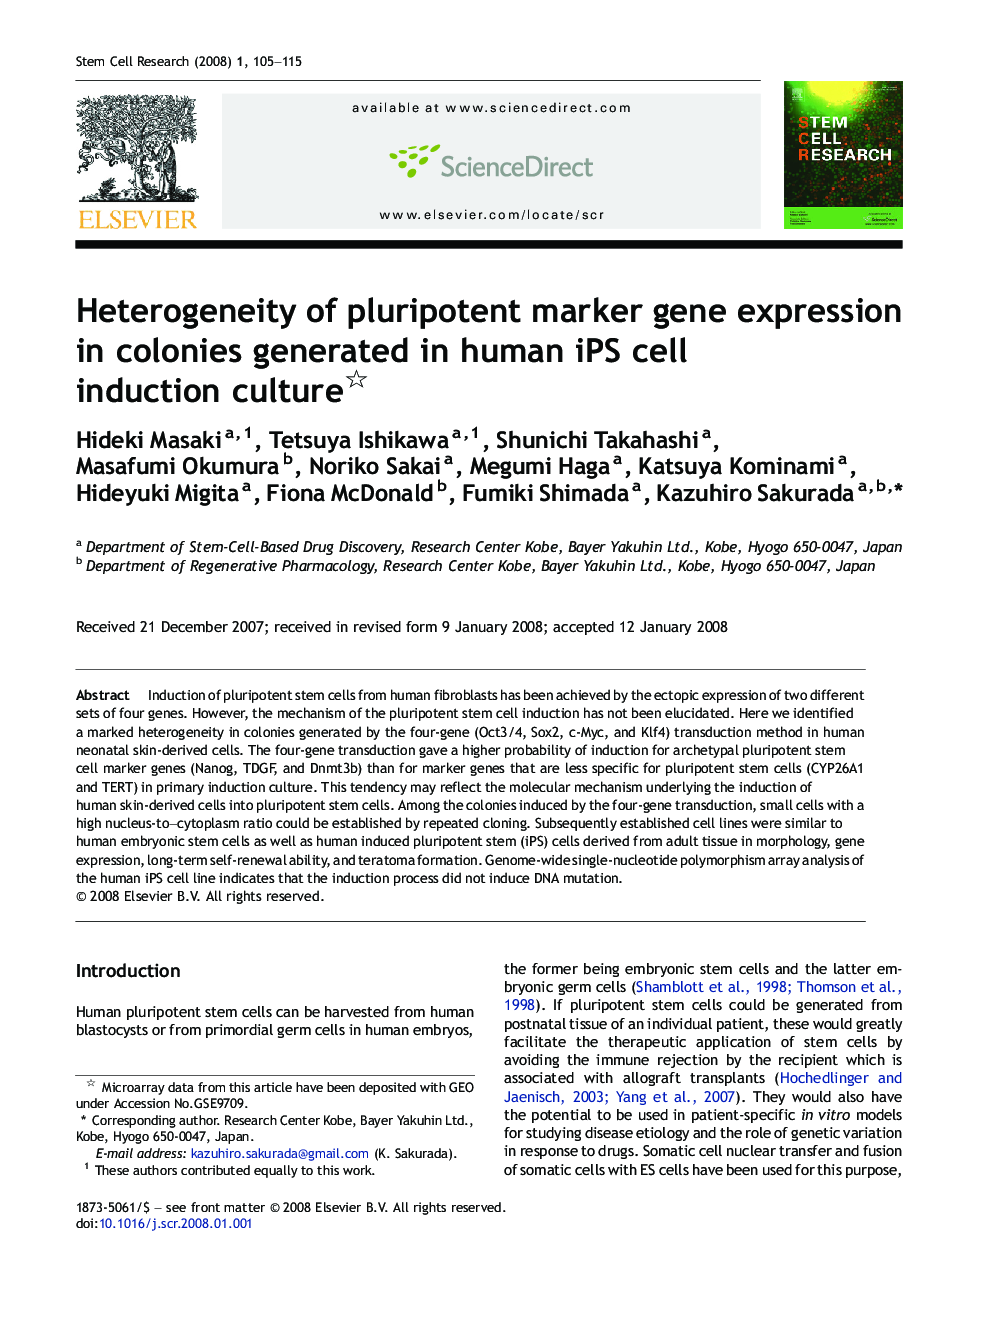 Heterogeneity of pluripotent marker gene expression in colonies generated in human iPS cell induction culture 